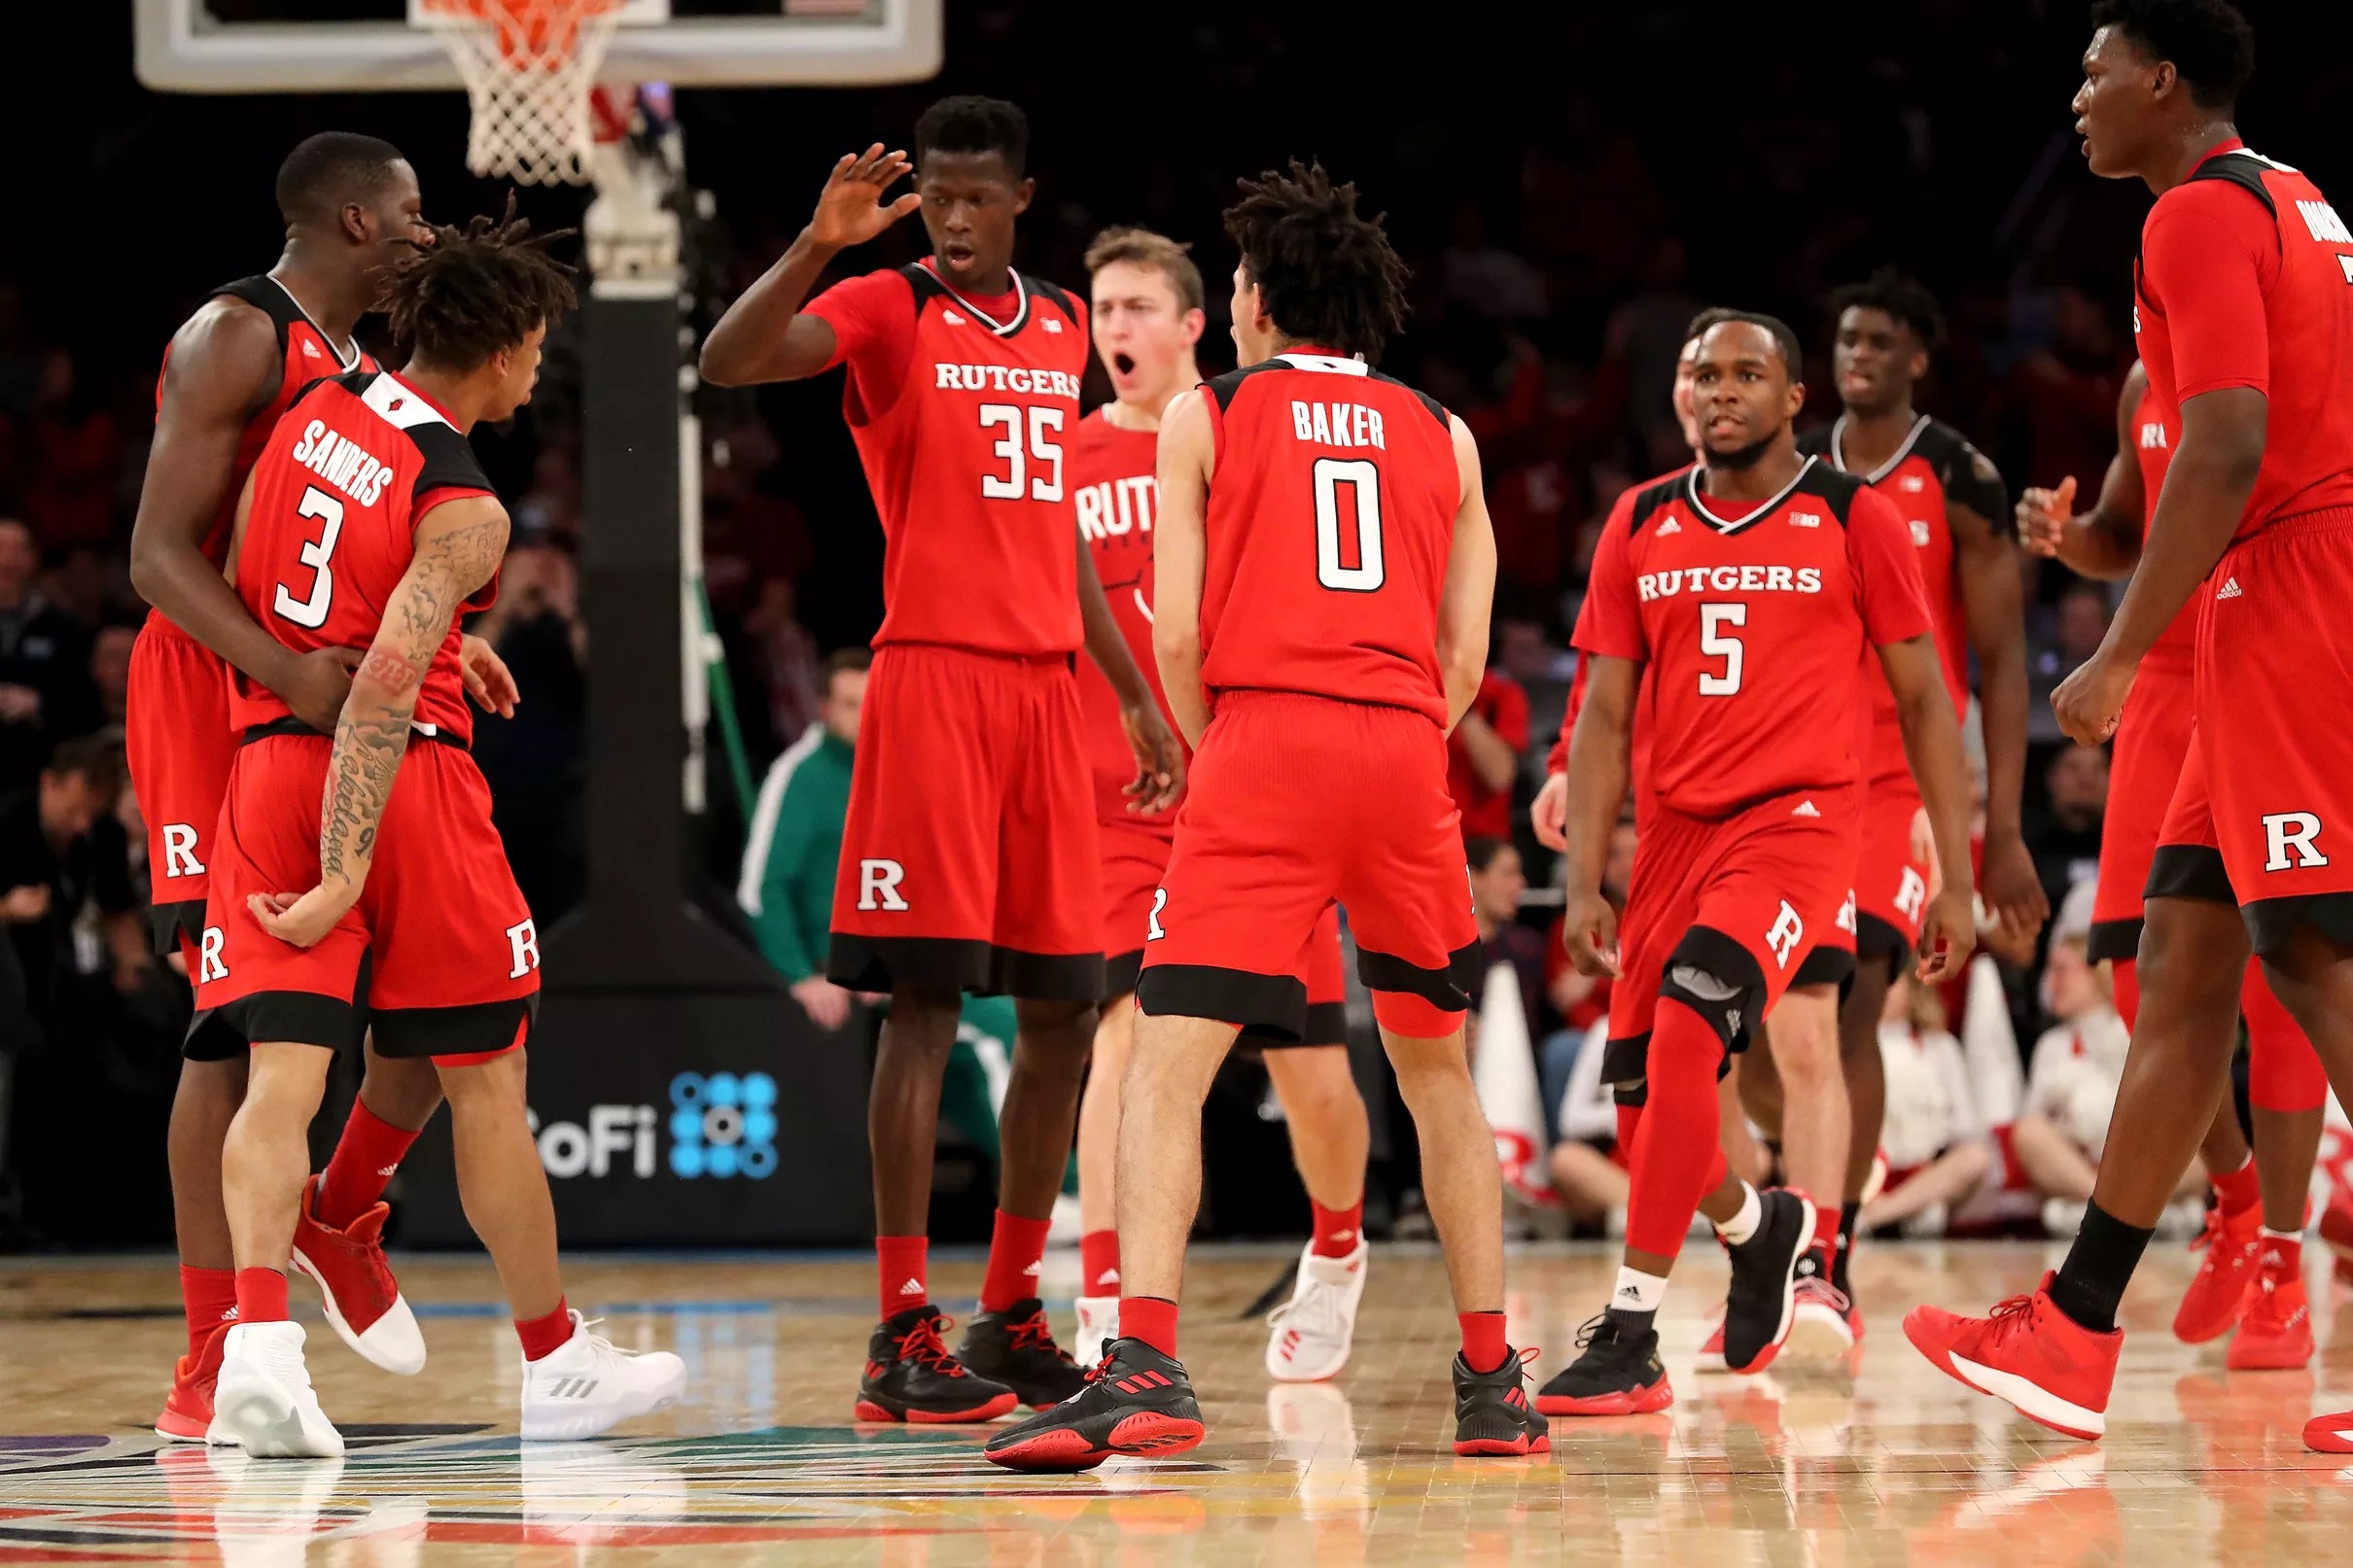 Rutgers Men’s Basketball Finishes With Highest KenPom Ranking